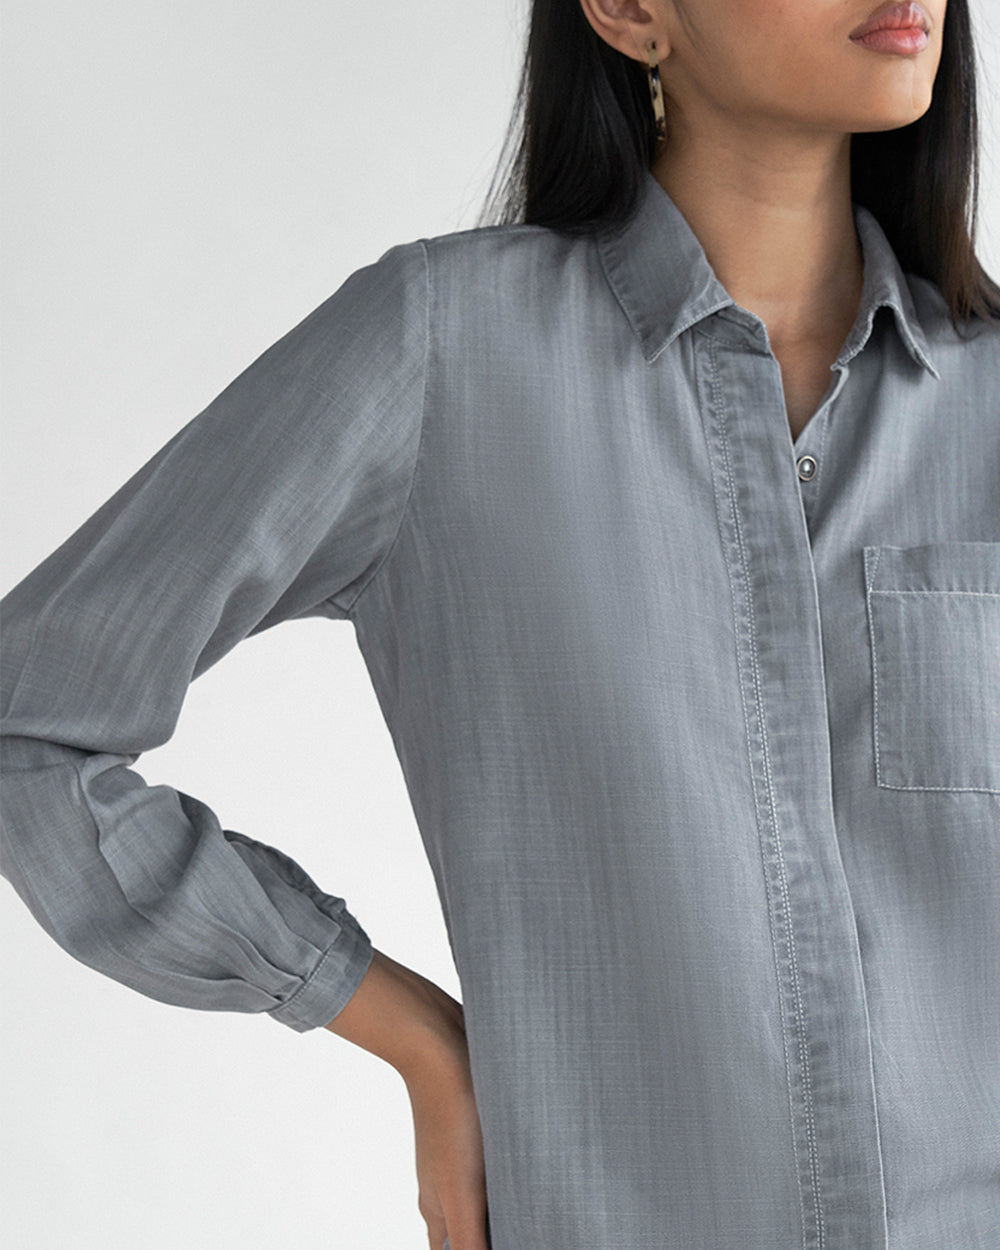 Shades of Everyday Grey Shirt by Reistor with Casual Wear, Denim, Denim Restored by Reistor, Grey, Natural, Solids, Tencel, Tops, Tunic Tops, Womenswear at Kamakhyaa for sustainable fashion